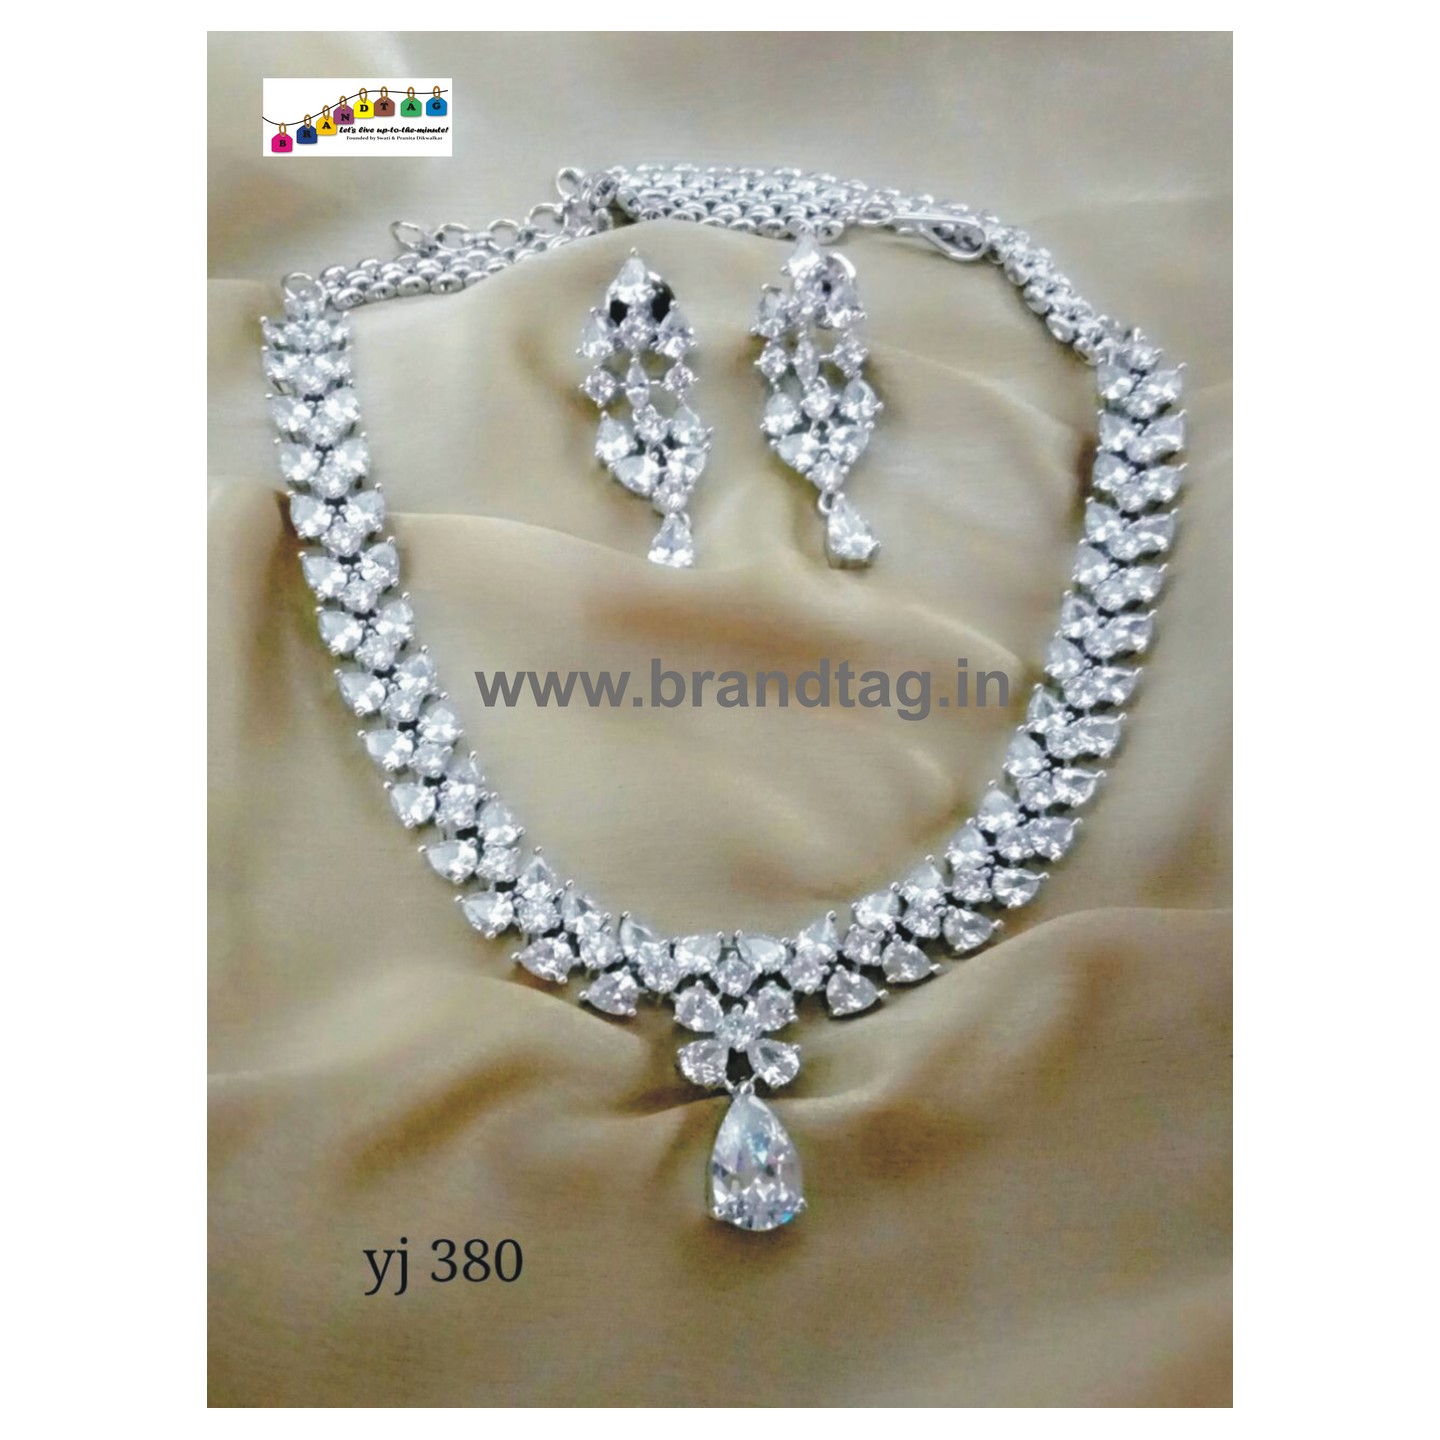 Special Navratri Collection...Modern Beautifully Designed White Diamond Necklace Set!! 